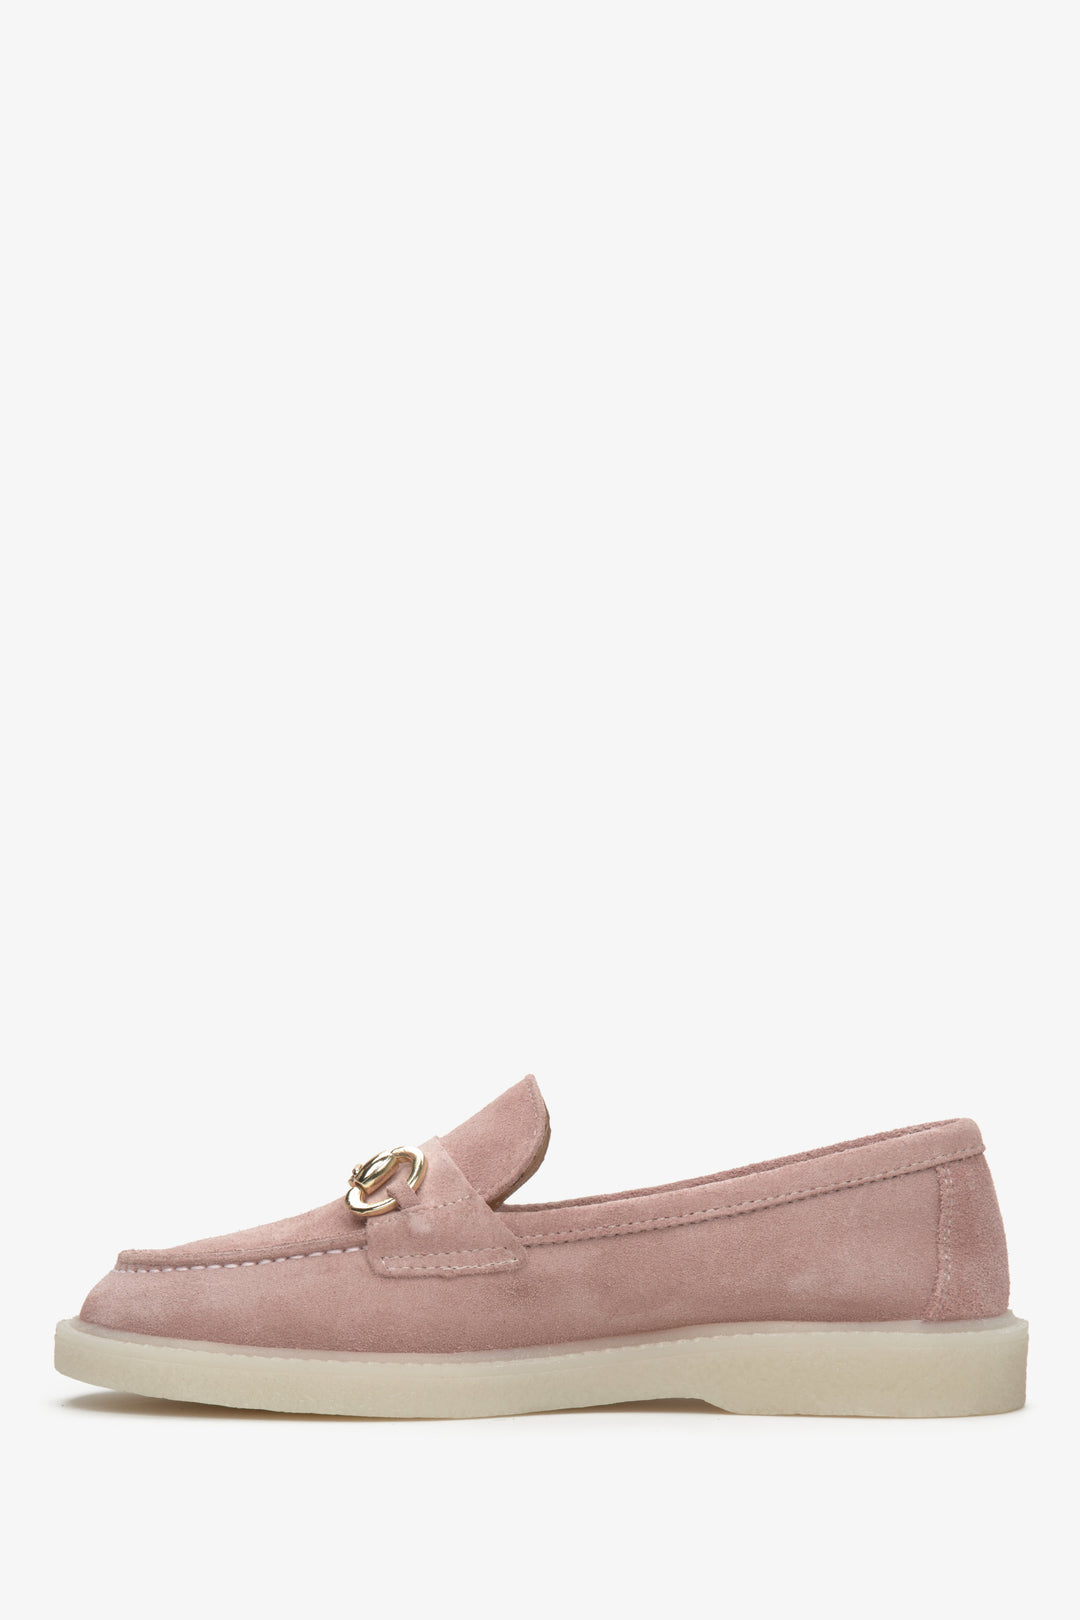 Light pink velour loafers Estro with gold buckle on Italian rubber sole.